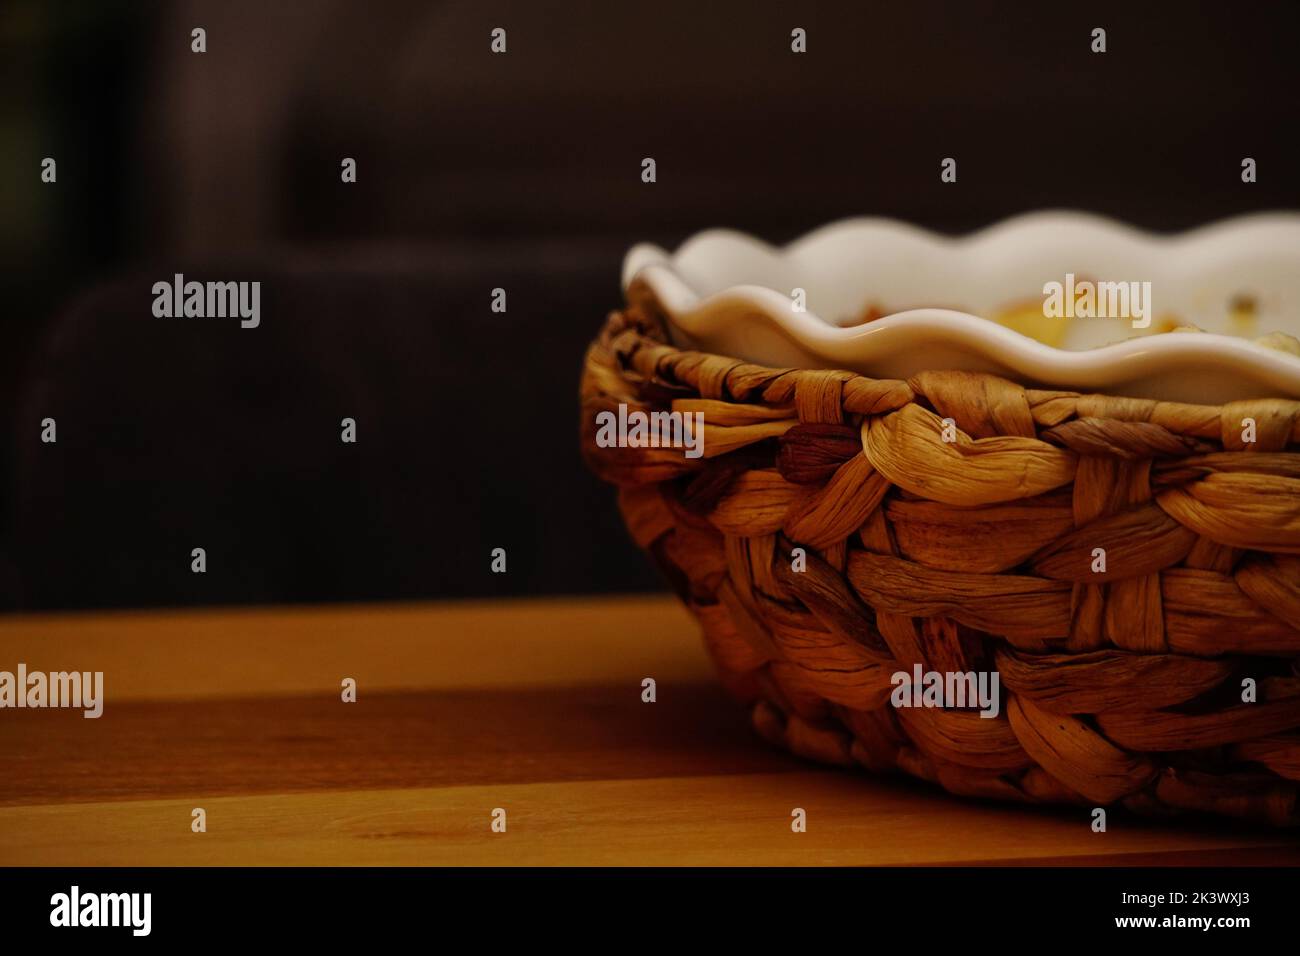 The close-up partial view of a decorative bowl over the wooden surface Stock Photo